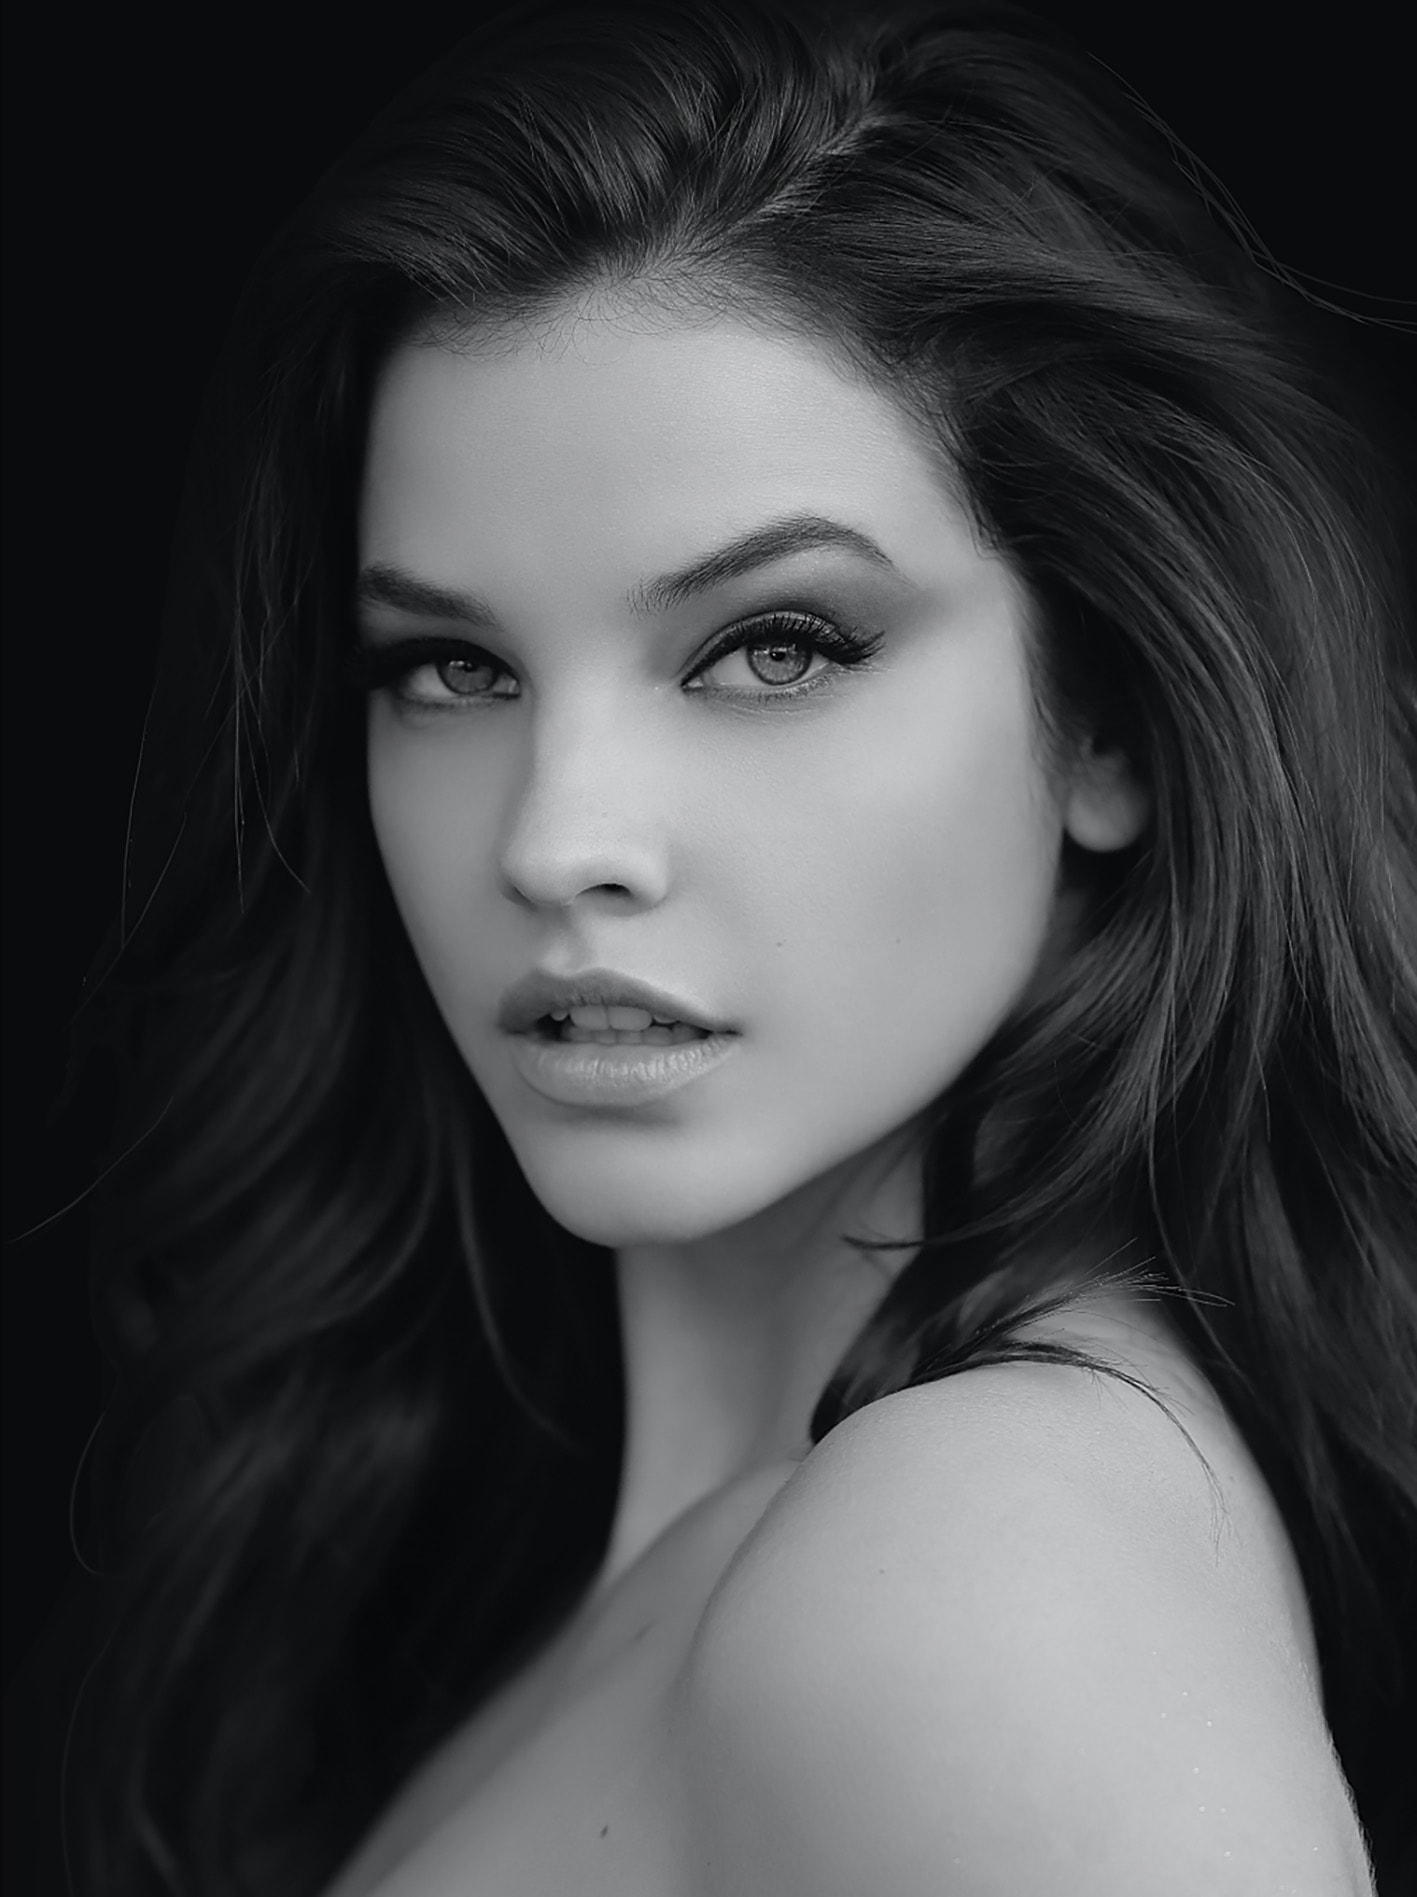 Barbara Palvin, Top model, IMG, L'Oreal, Nicolas Gerardin, Beauty, Models, Black and White, fashion, Cannes, Cannes festivals